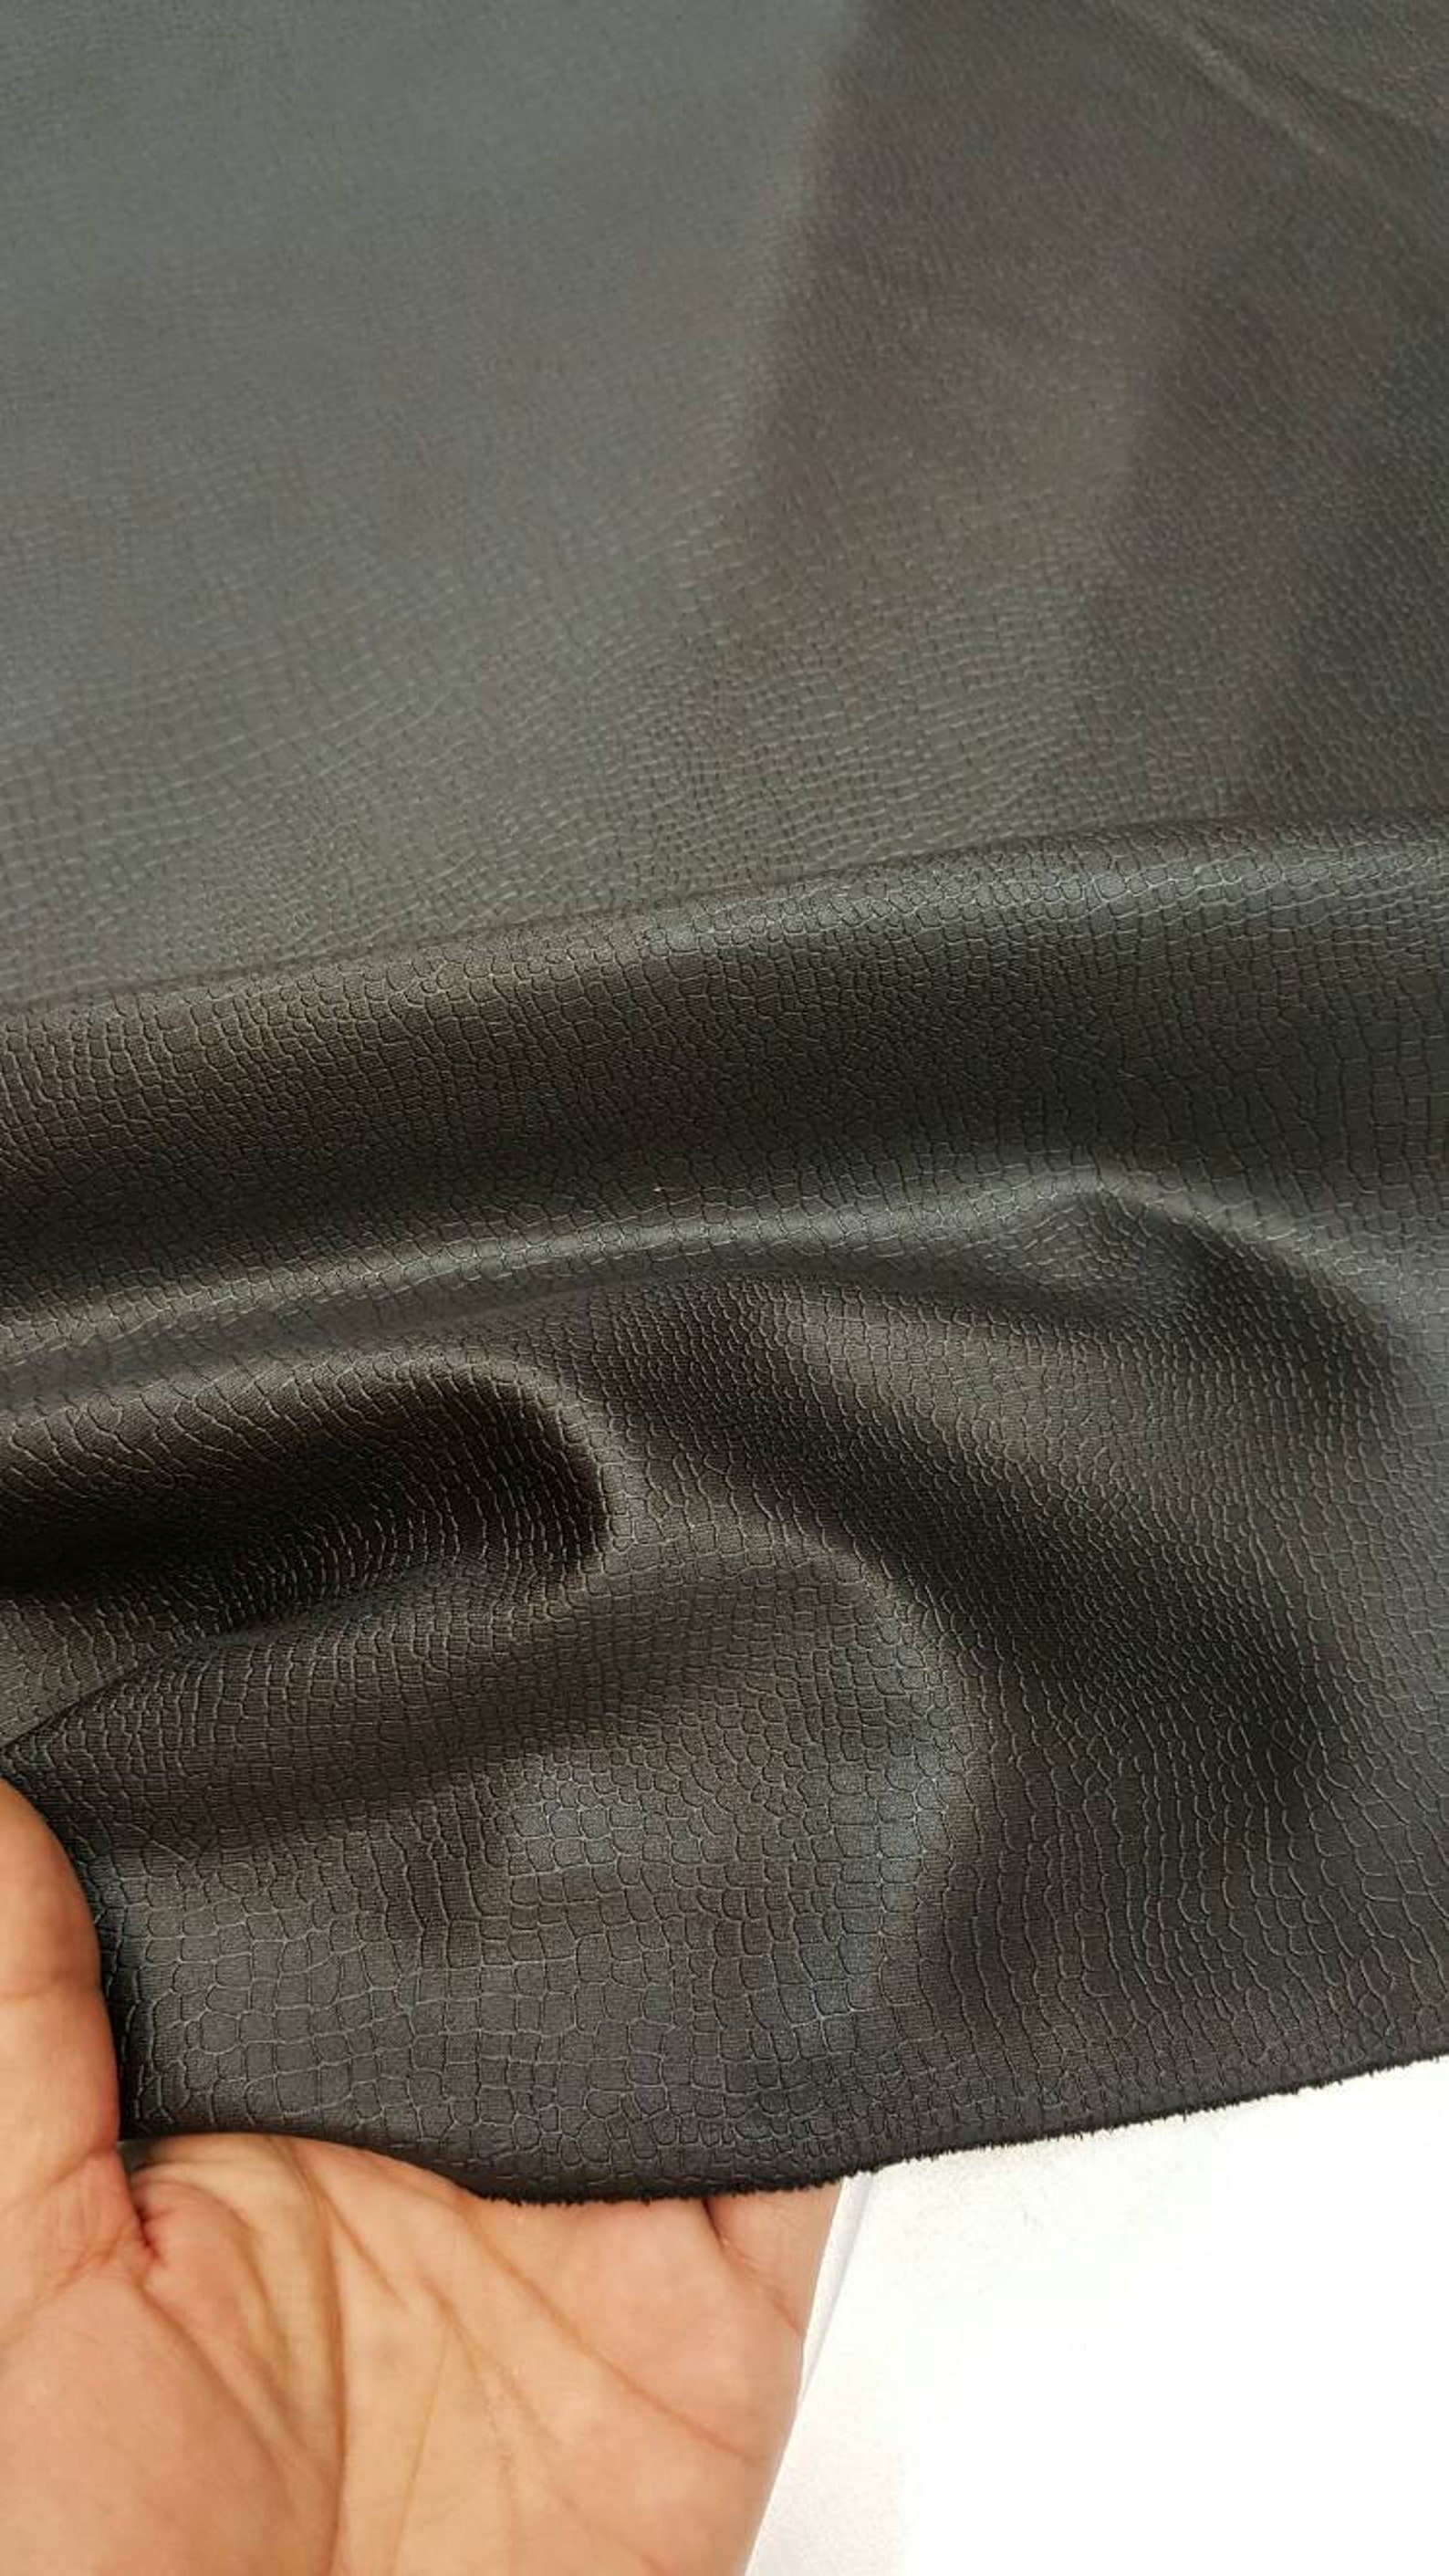 Black Stretch Vinyl Textured Fabric Sold by the Yard Vinyl on | Etsy